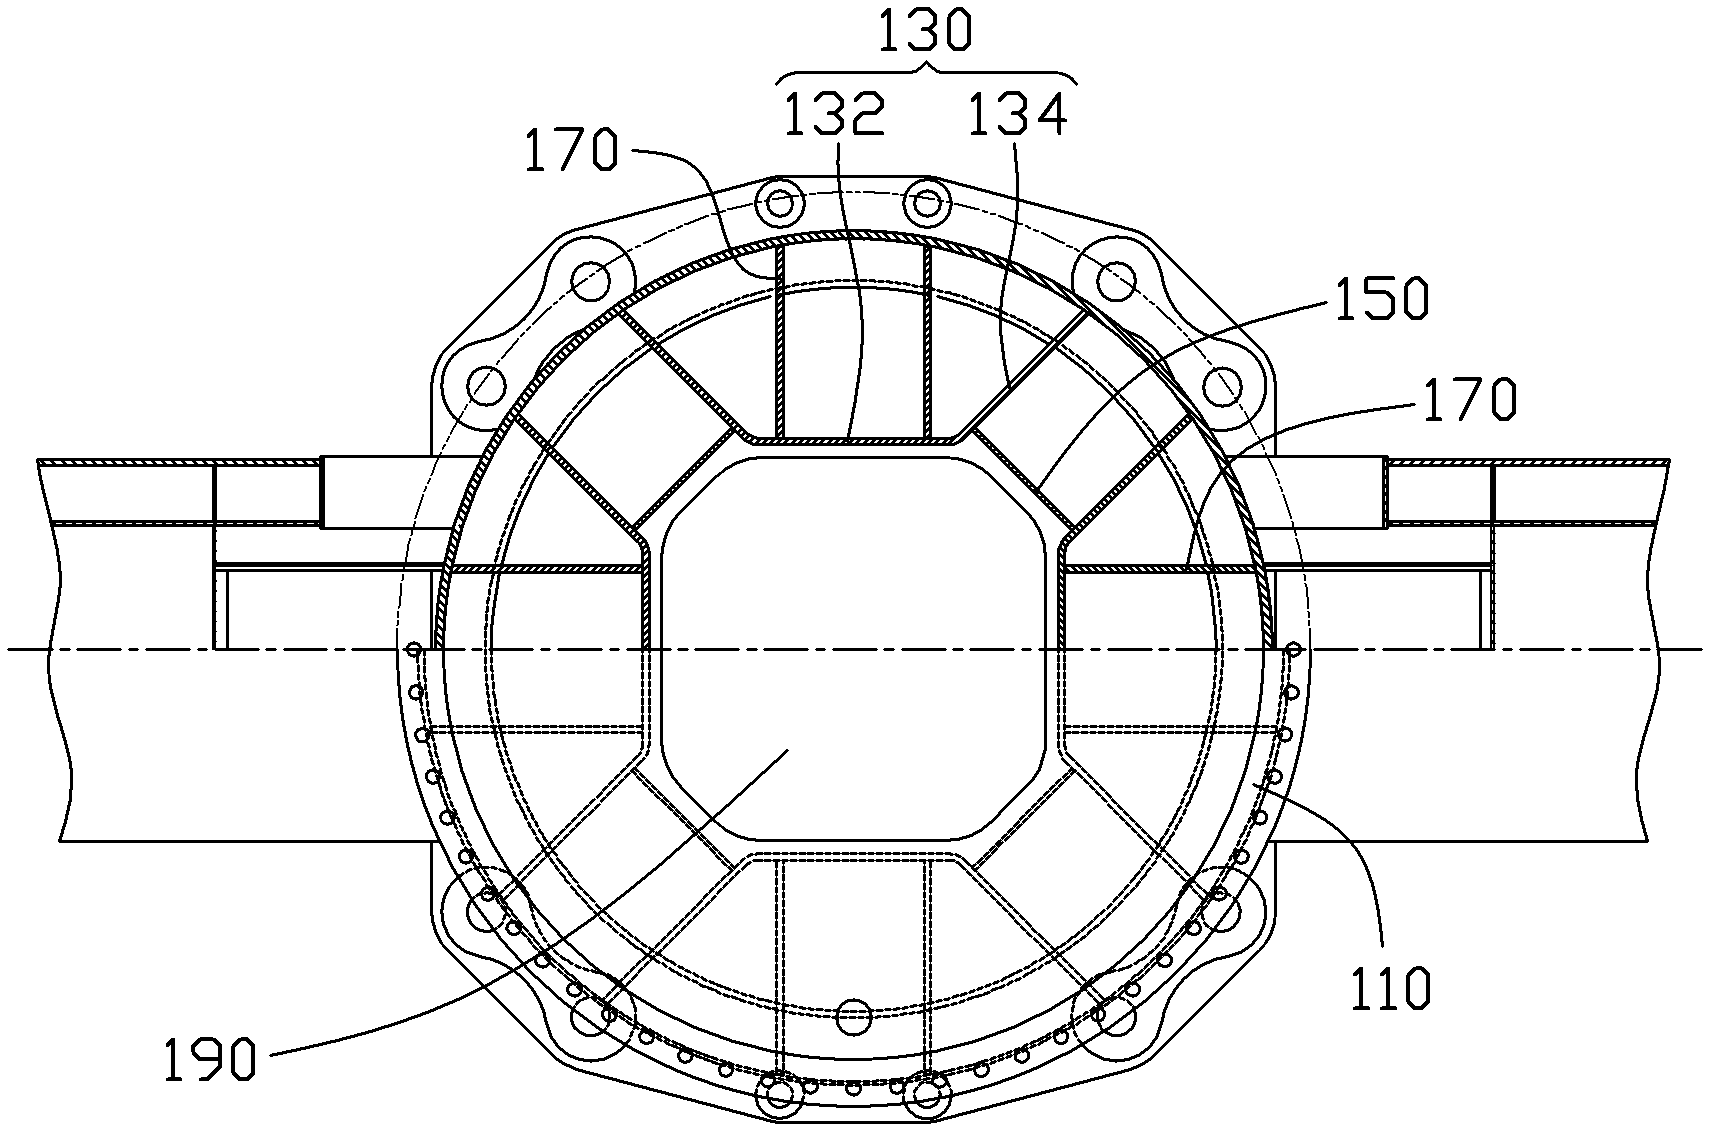 Frame and rotary bearing seat structure of frame